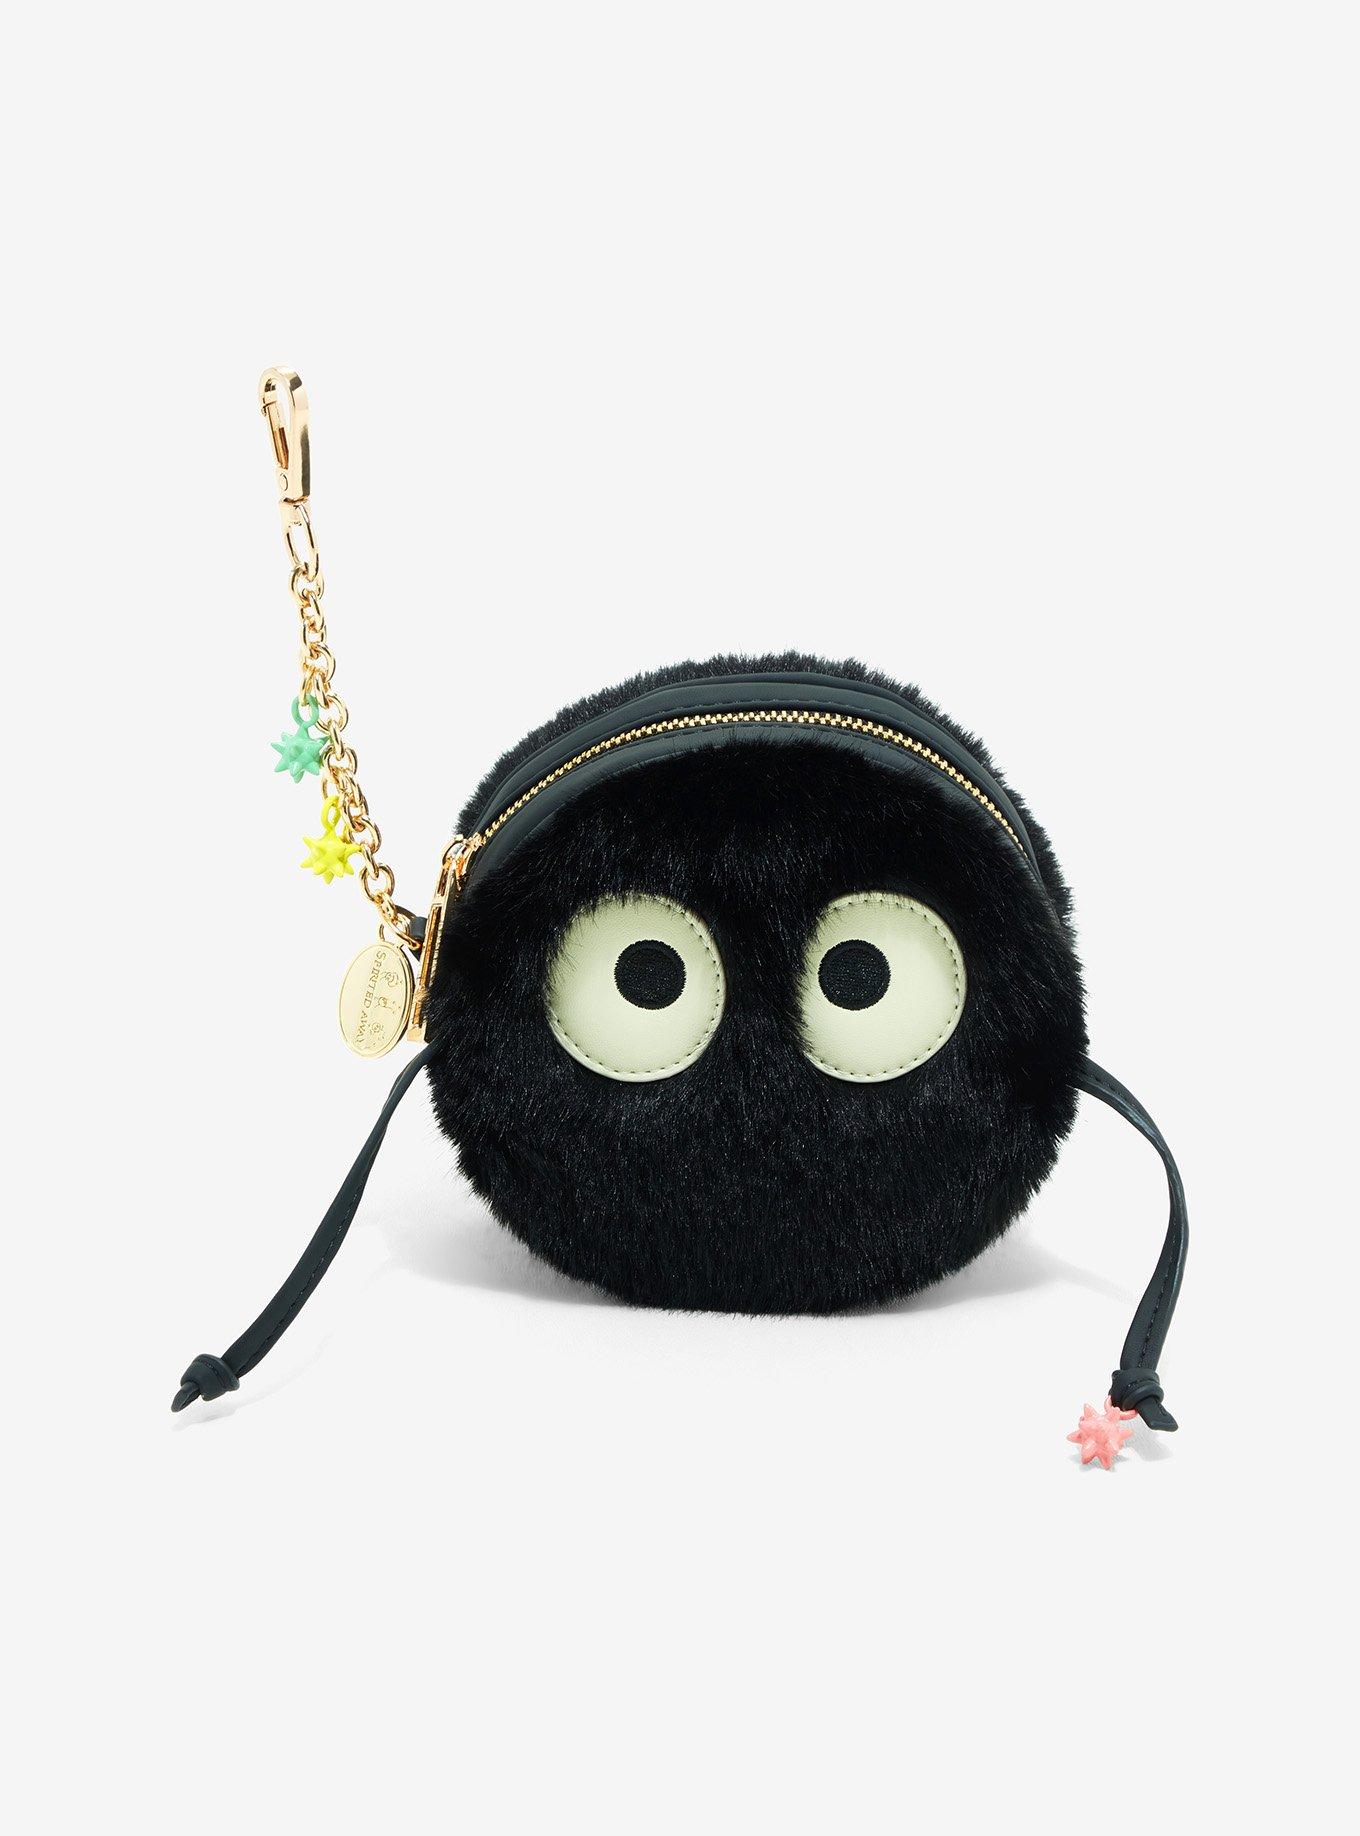 Our Universe Studio Ghibli Spirited Away Soot Sprite Figural Coin